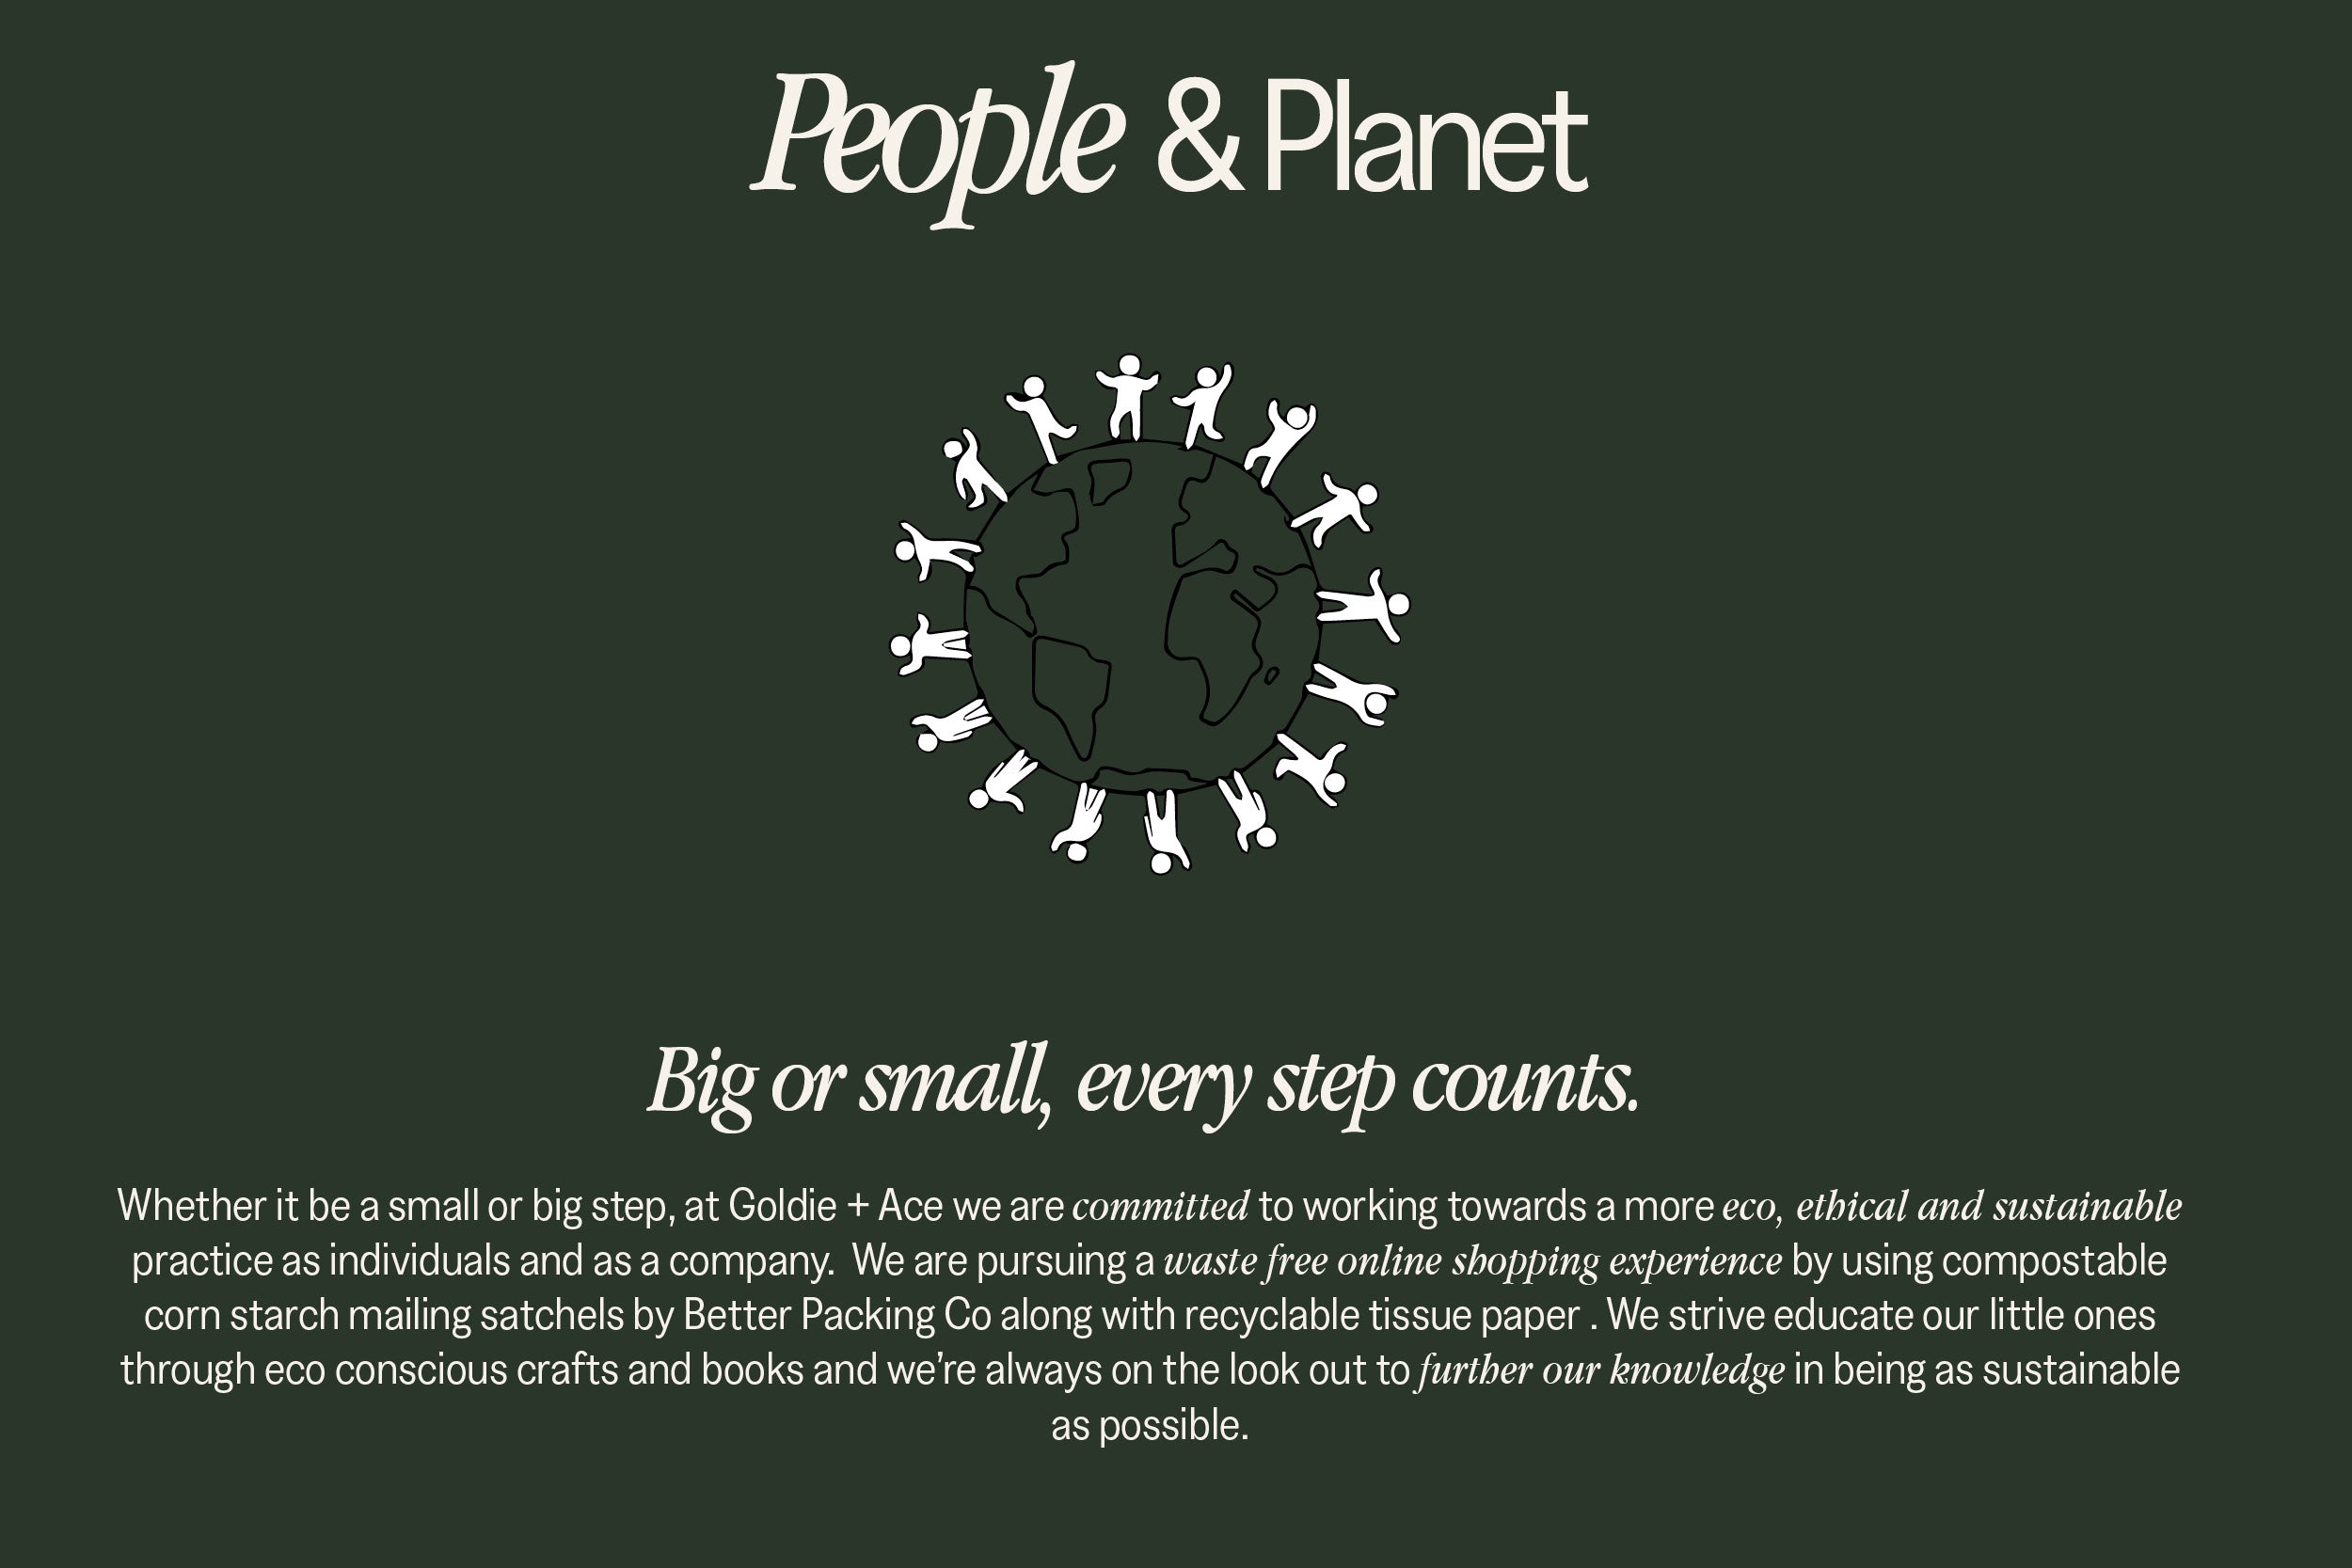 At Goldie + Ace we are committed to working towards a more eco, ethical and sustainable practice as individuals and as a company.